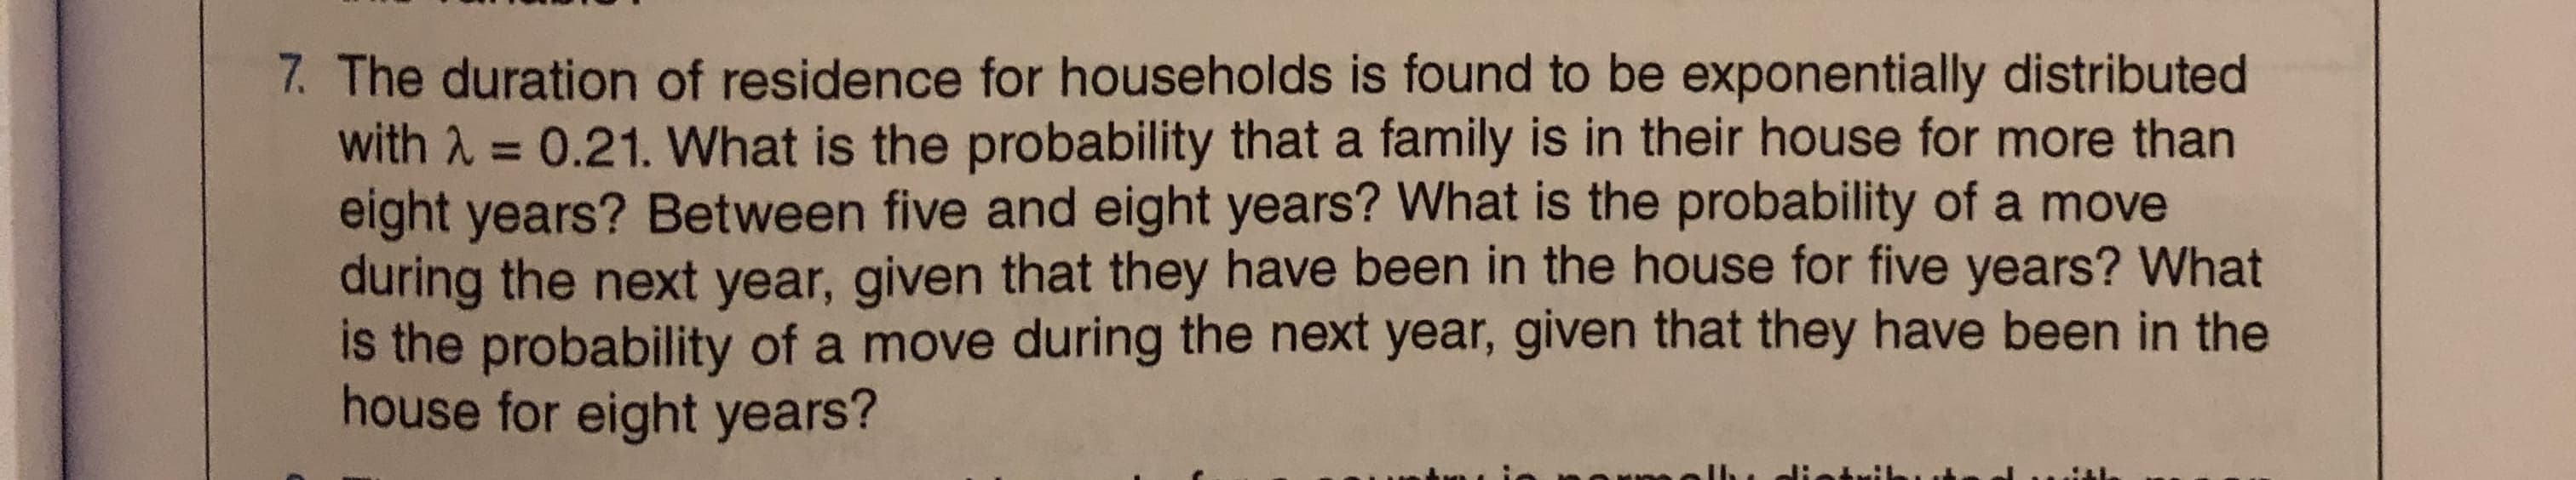 7. The duration of residence for households is found to be exponentially distributed
with A = 0.21. What is the probability that a family is in their house for more than
eight years? Between five and eight years? What is the probability of a move
during the next year, given that they have been in the house for five years? What
is the probability of a move during the next year, given that they have been in the
house for eight years?
